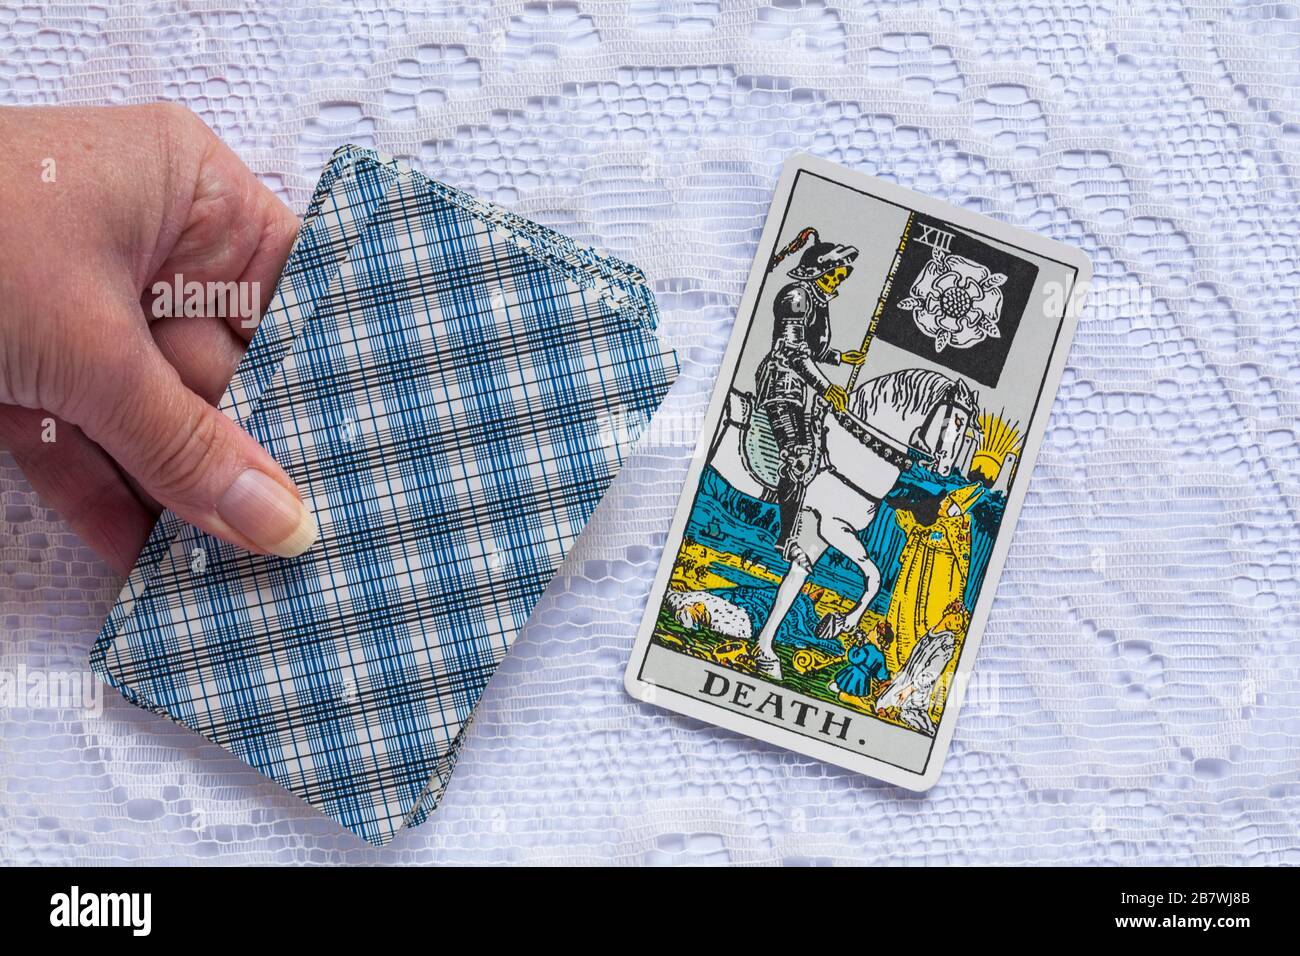 hand holding Rider Tarot Cards designed by Pamela Colman Smith under supervision of Arthur Edward Waite with Death tarot card upturned Stock Photo